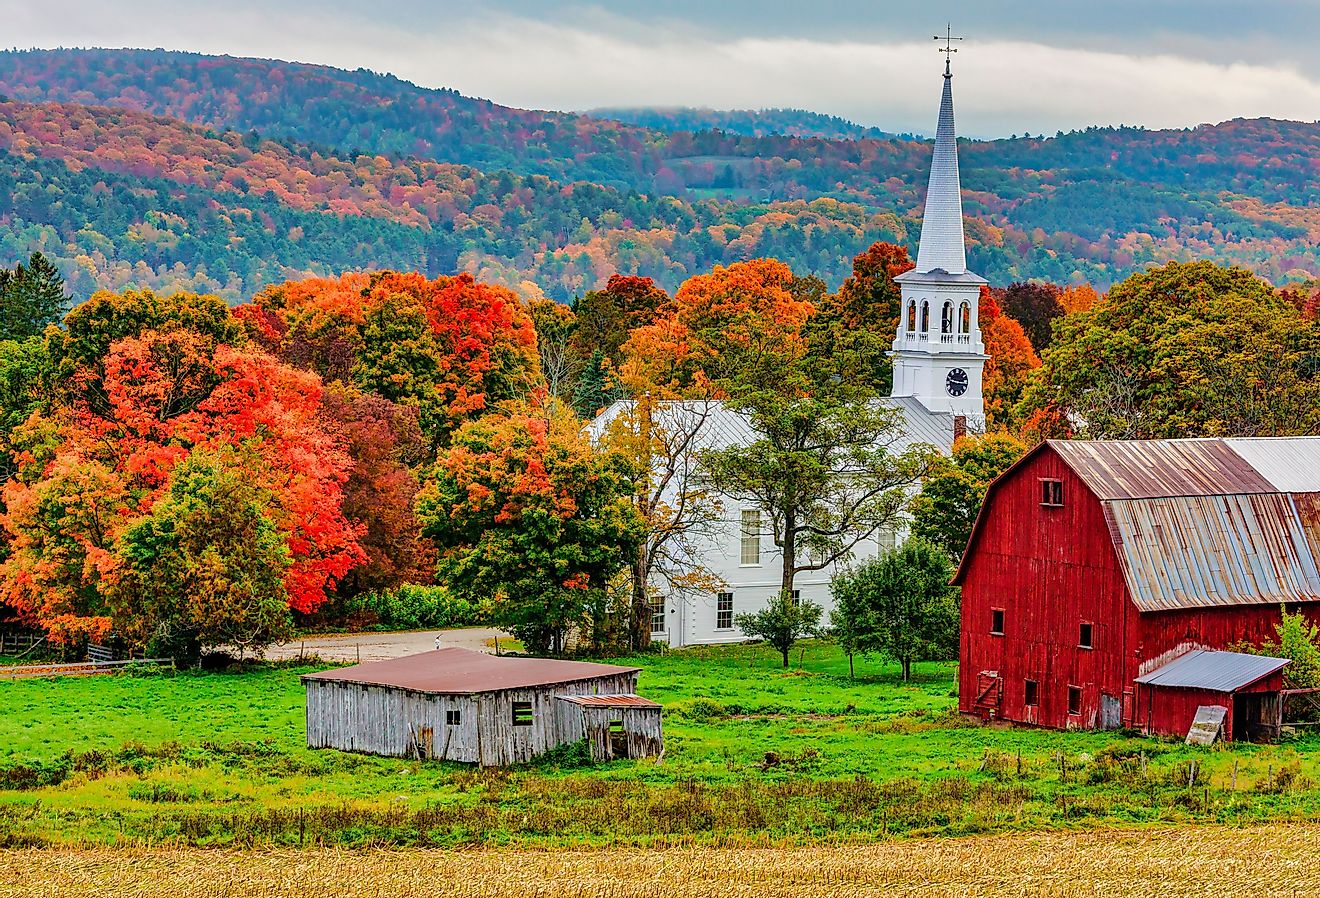 Red barn and church next to a harvested cornfield in Woodstock, Vermont. Image credit MindStorm via Shutterstock